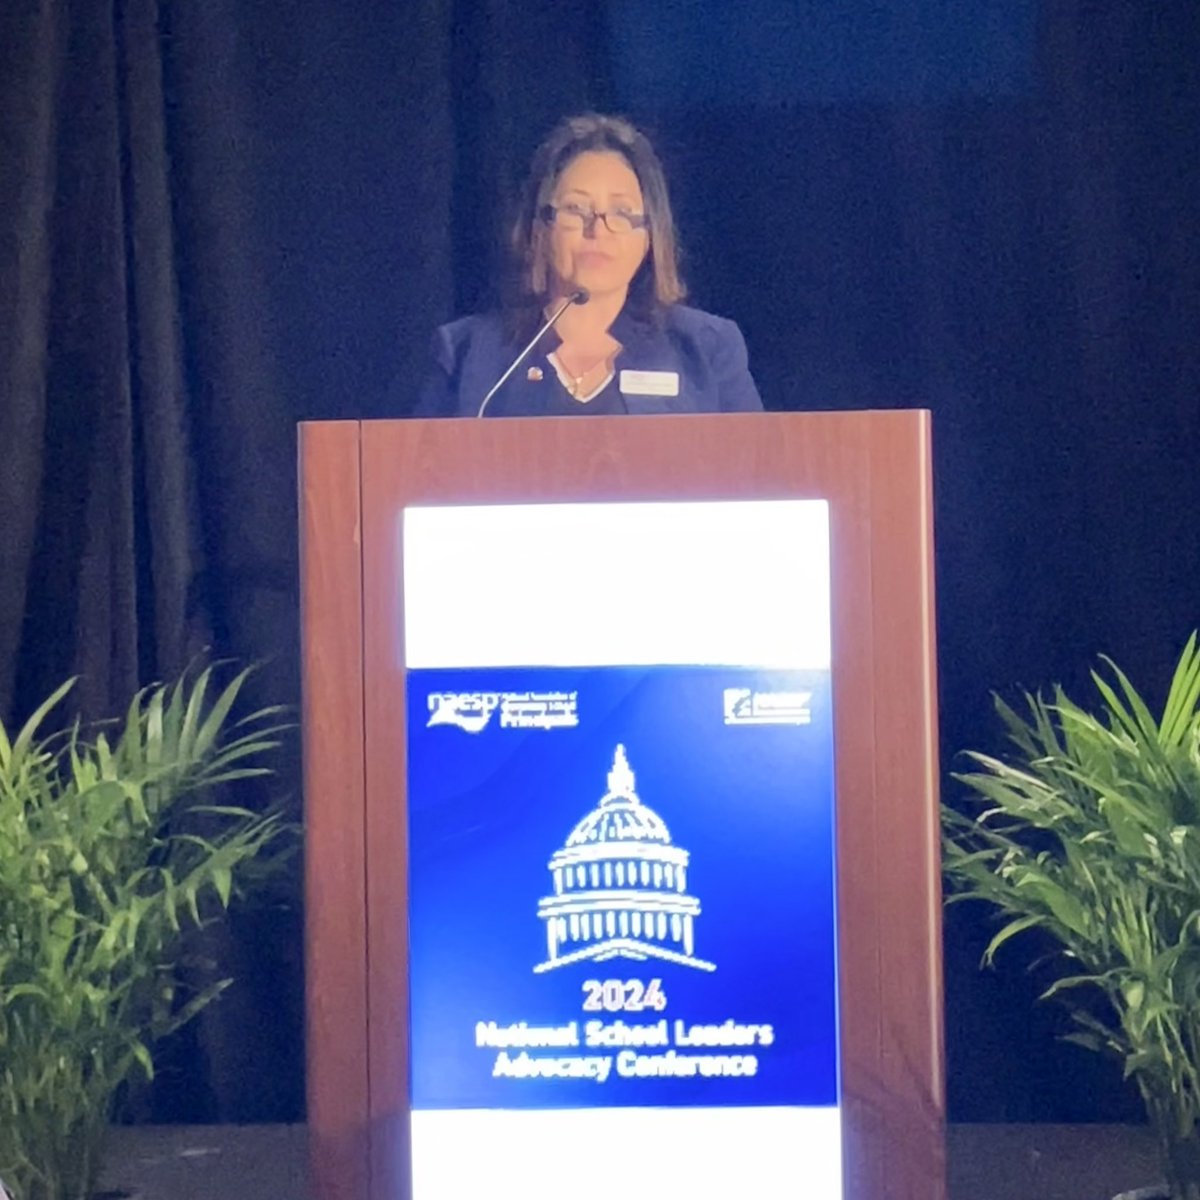 Day 2 begins with an address by @NAESP President and NYC Principal @CaraballoSuarz strengthening our resolve to be forceful advocates for Principals across the nation. @nycespa is proud and ready! #PrincipalsAdvocate @followcsa @saanys